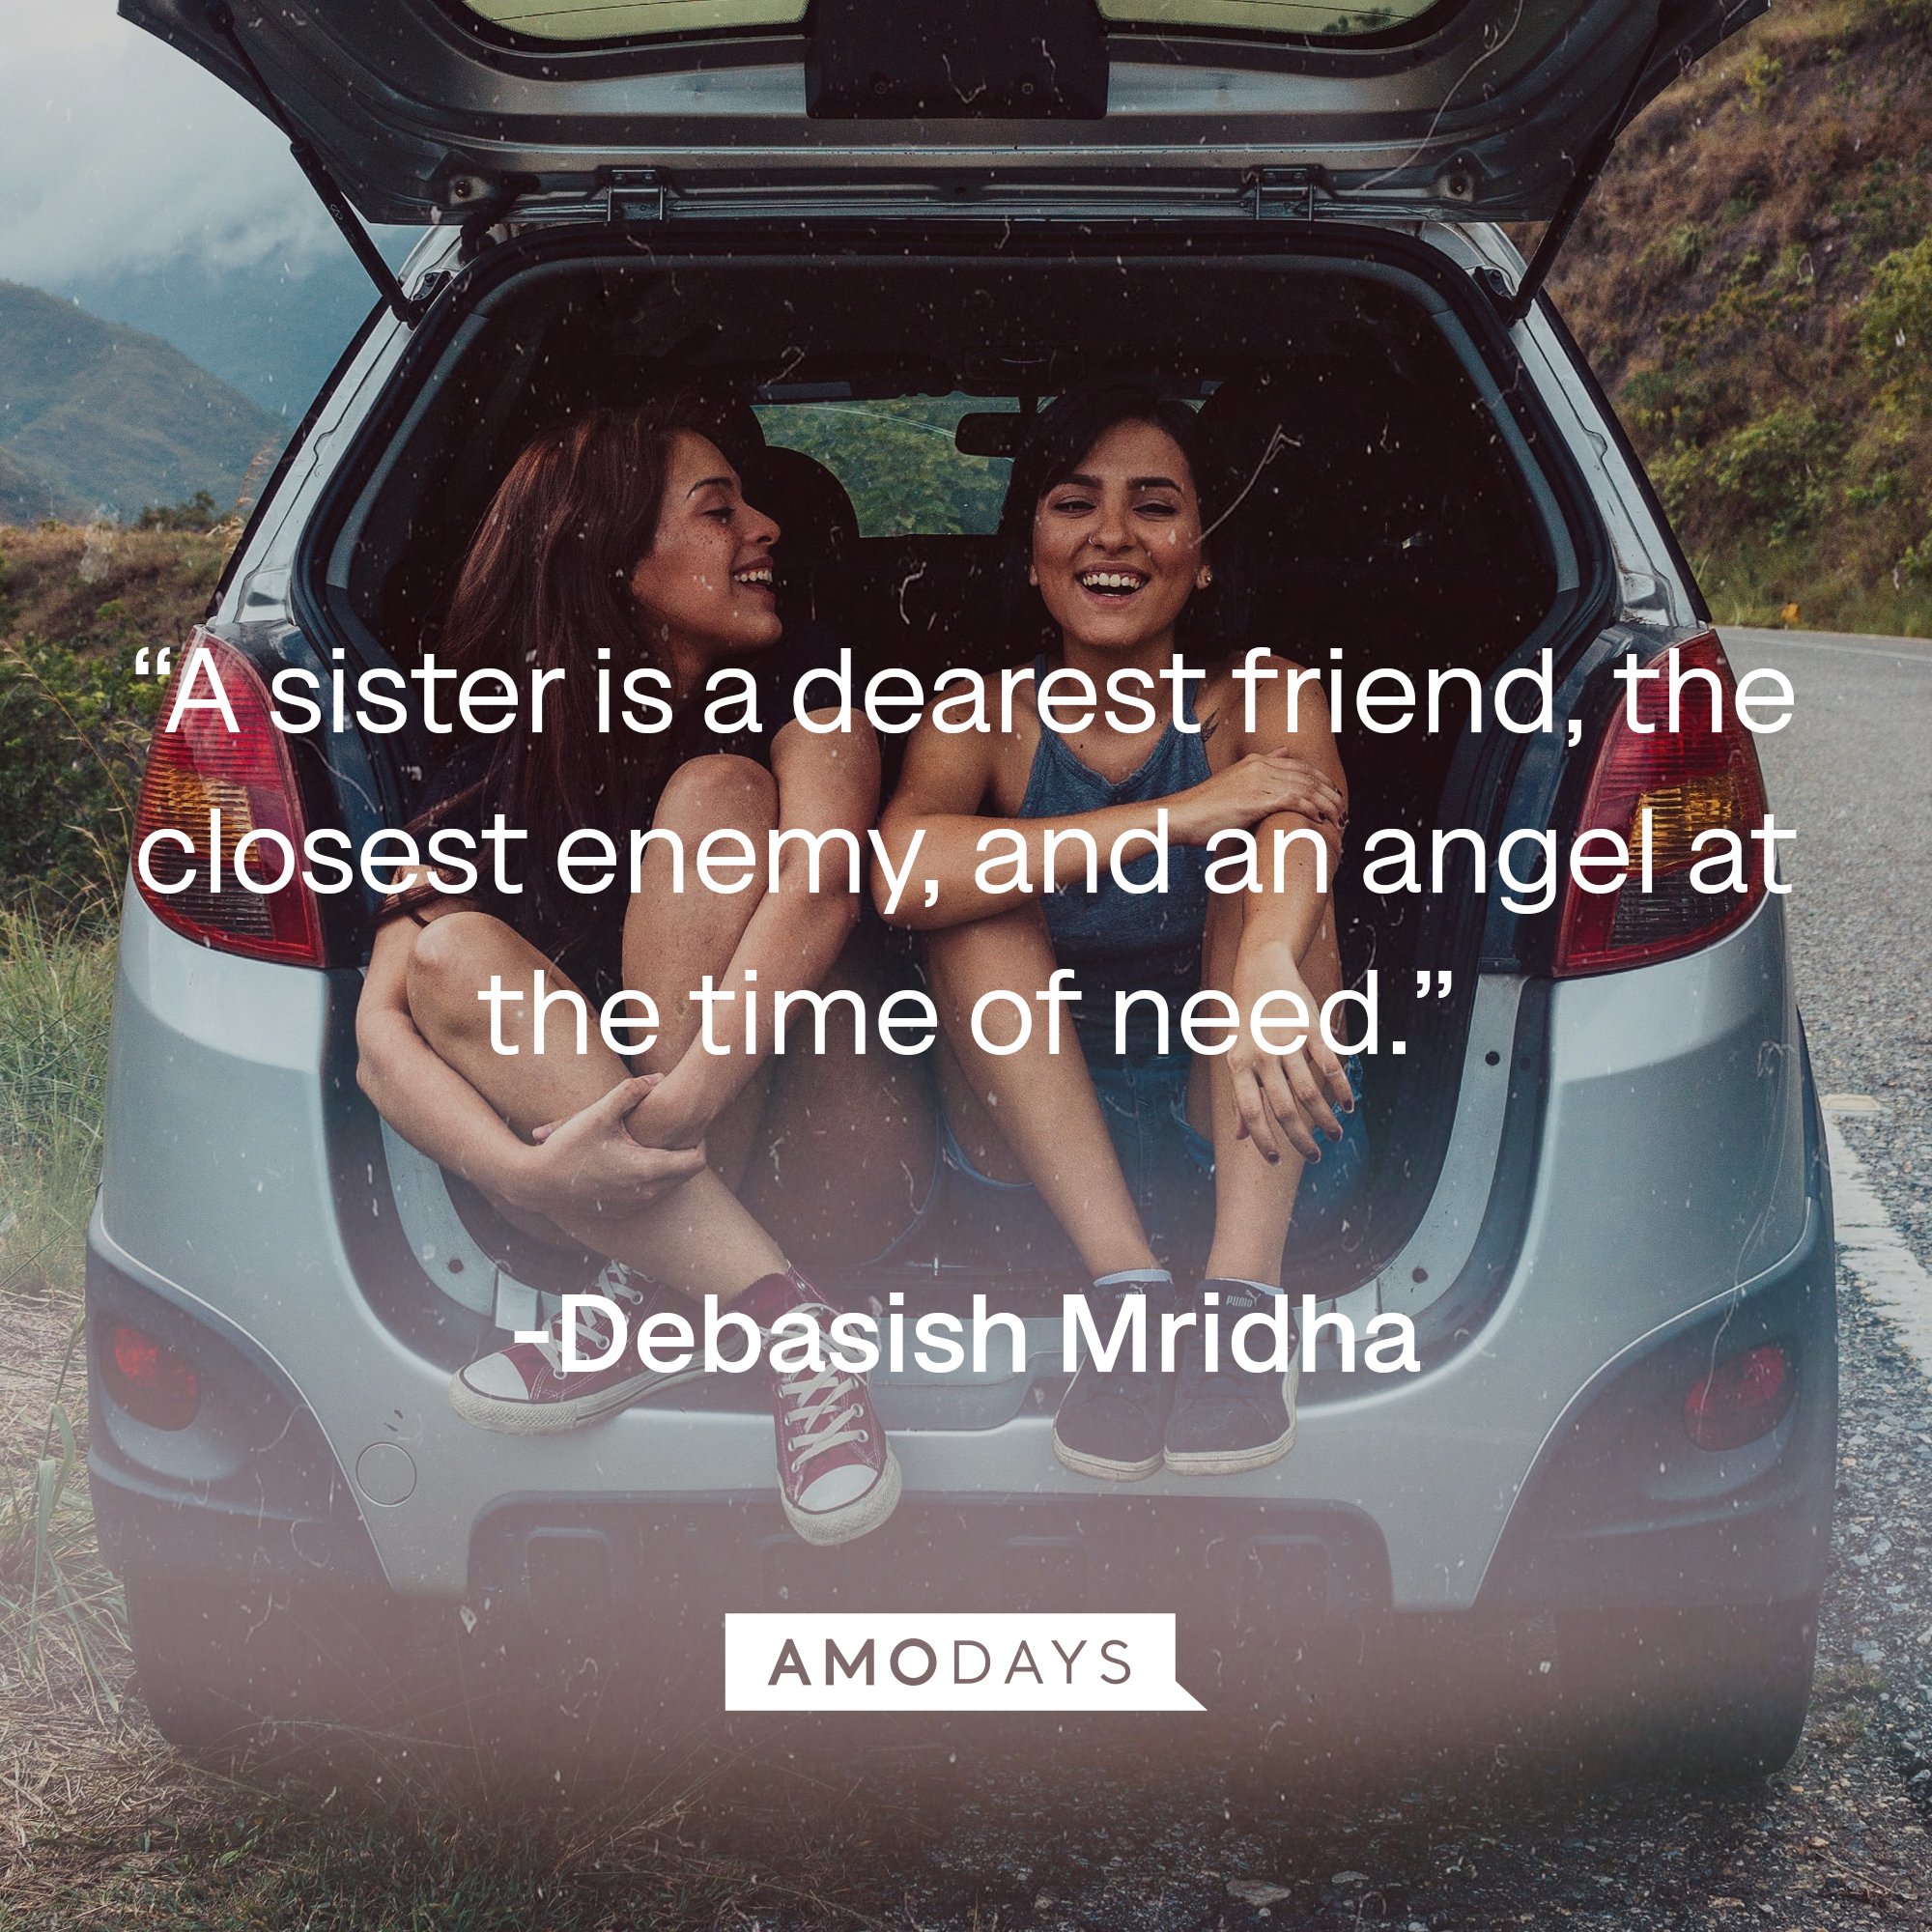 Debasish Mridha's quote: “A sister is a dearest friend, the closest enemy, and an angel at the time of need.” | Image: AmoDays